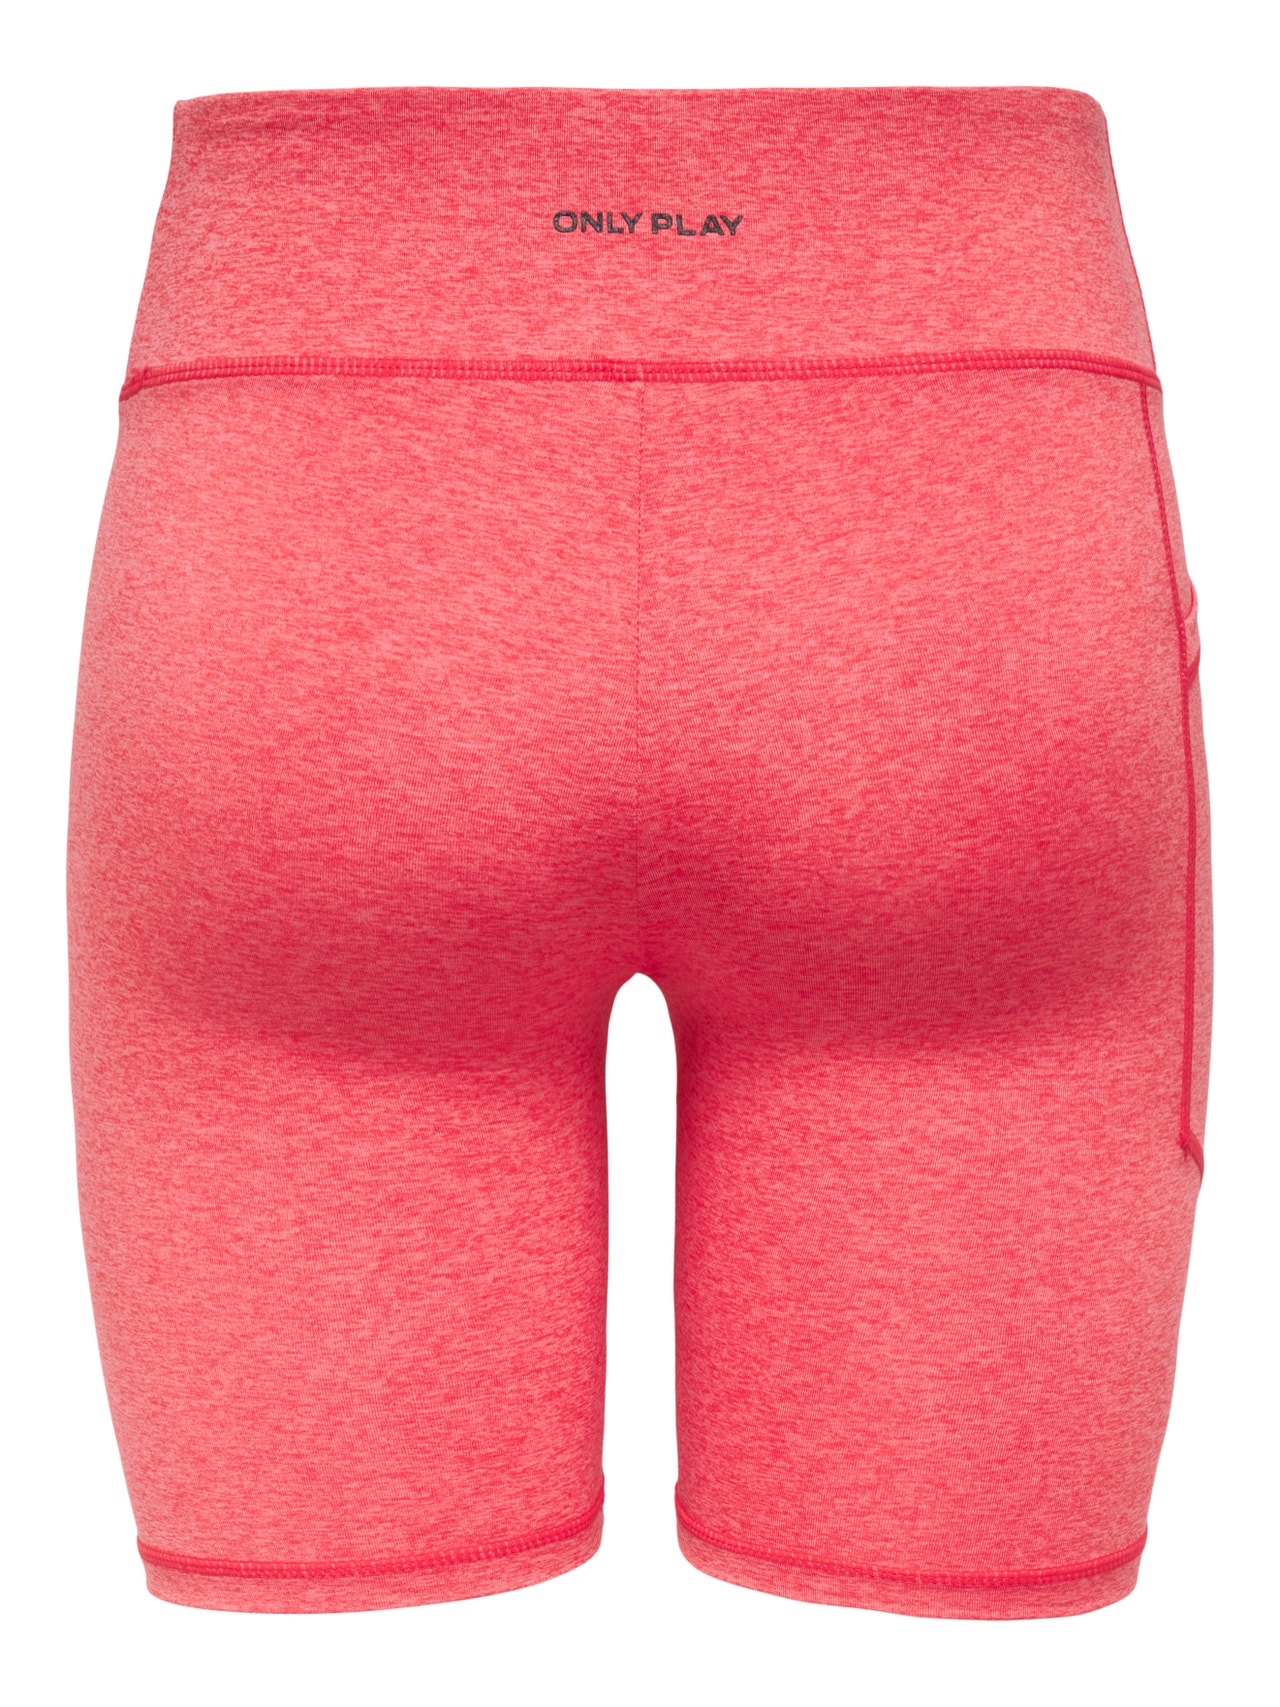 ONLY Slim Fit Shorts -Sun Kissed Coral - 15283881